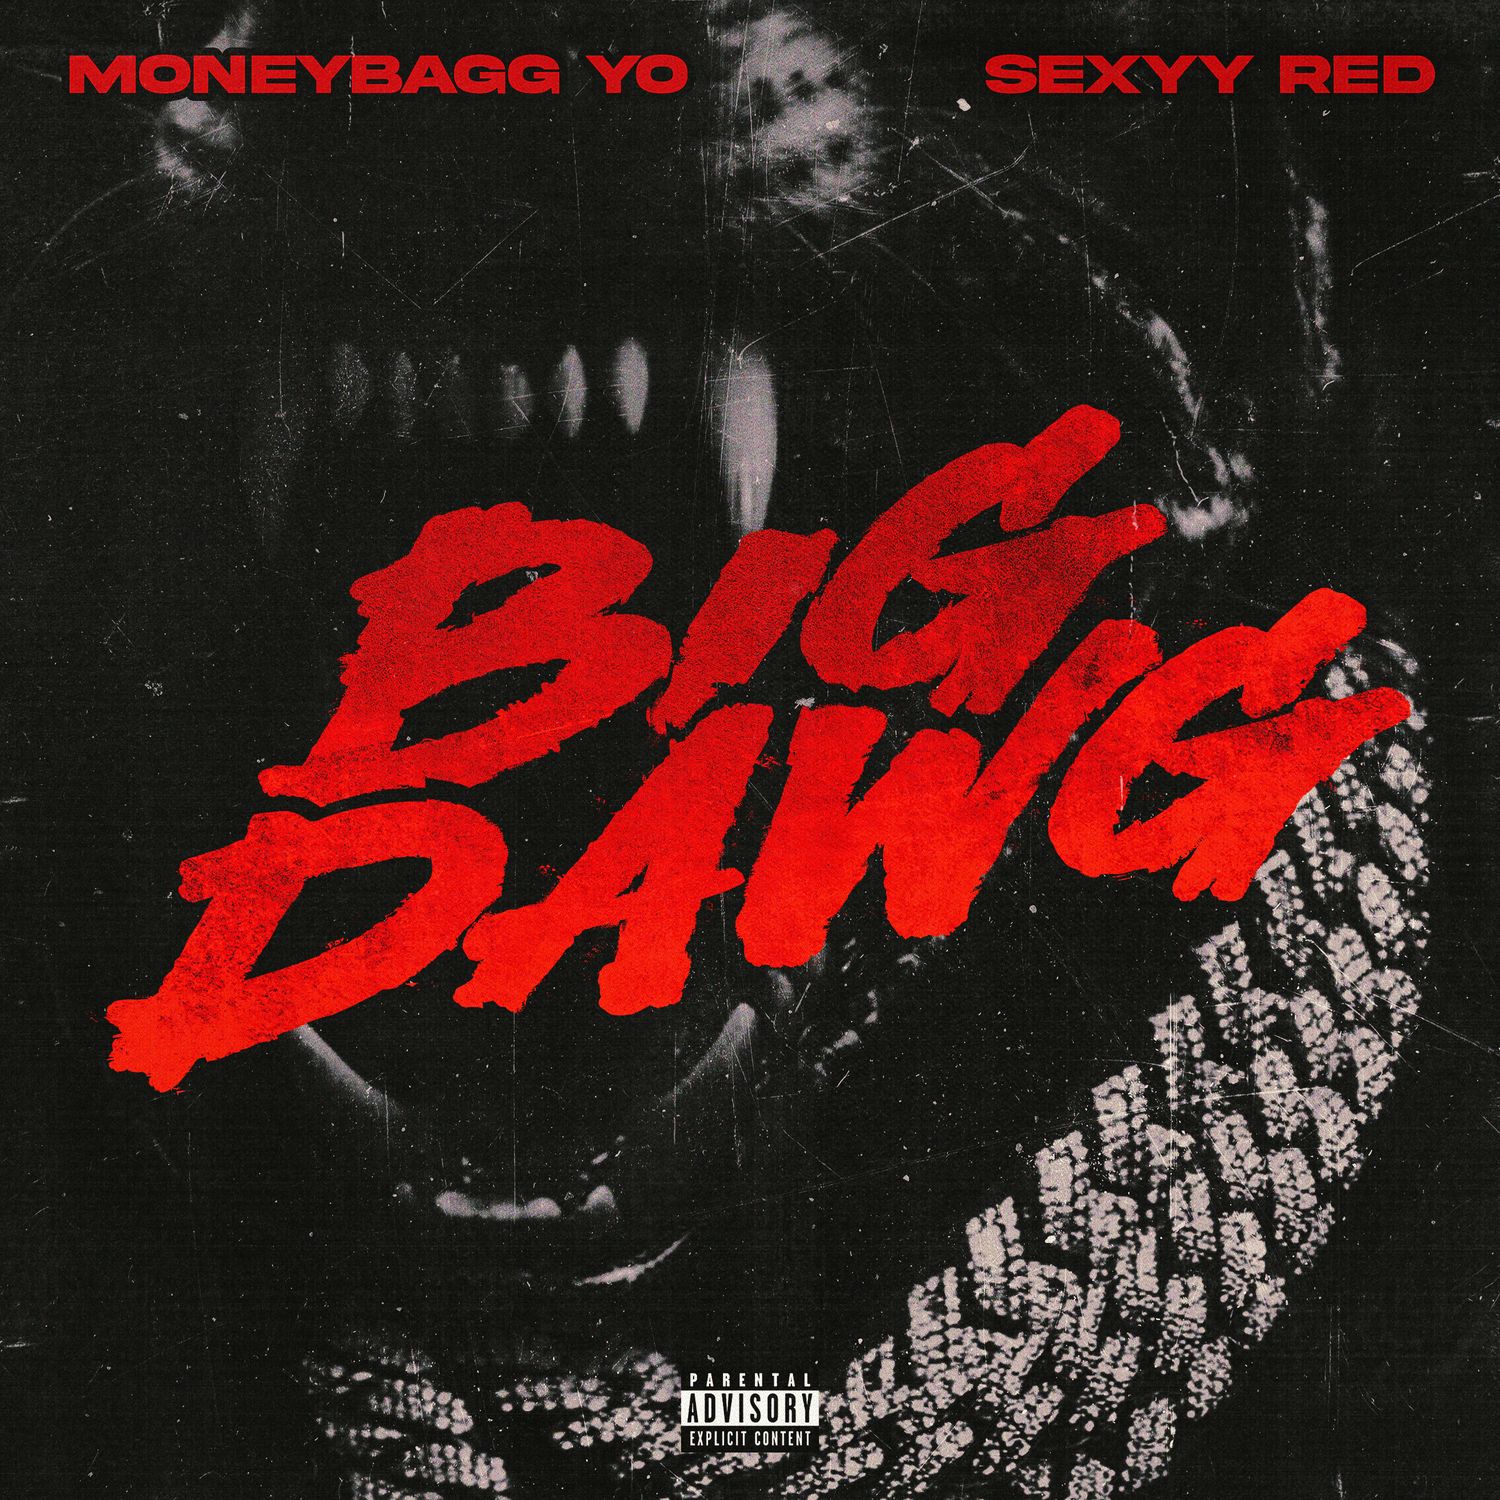 MP3: Moneybagg Yo Ft. Sexyy Red & CMG The Label – Big Dawg